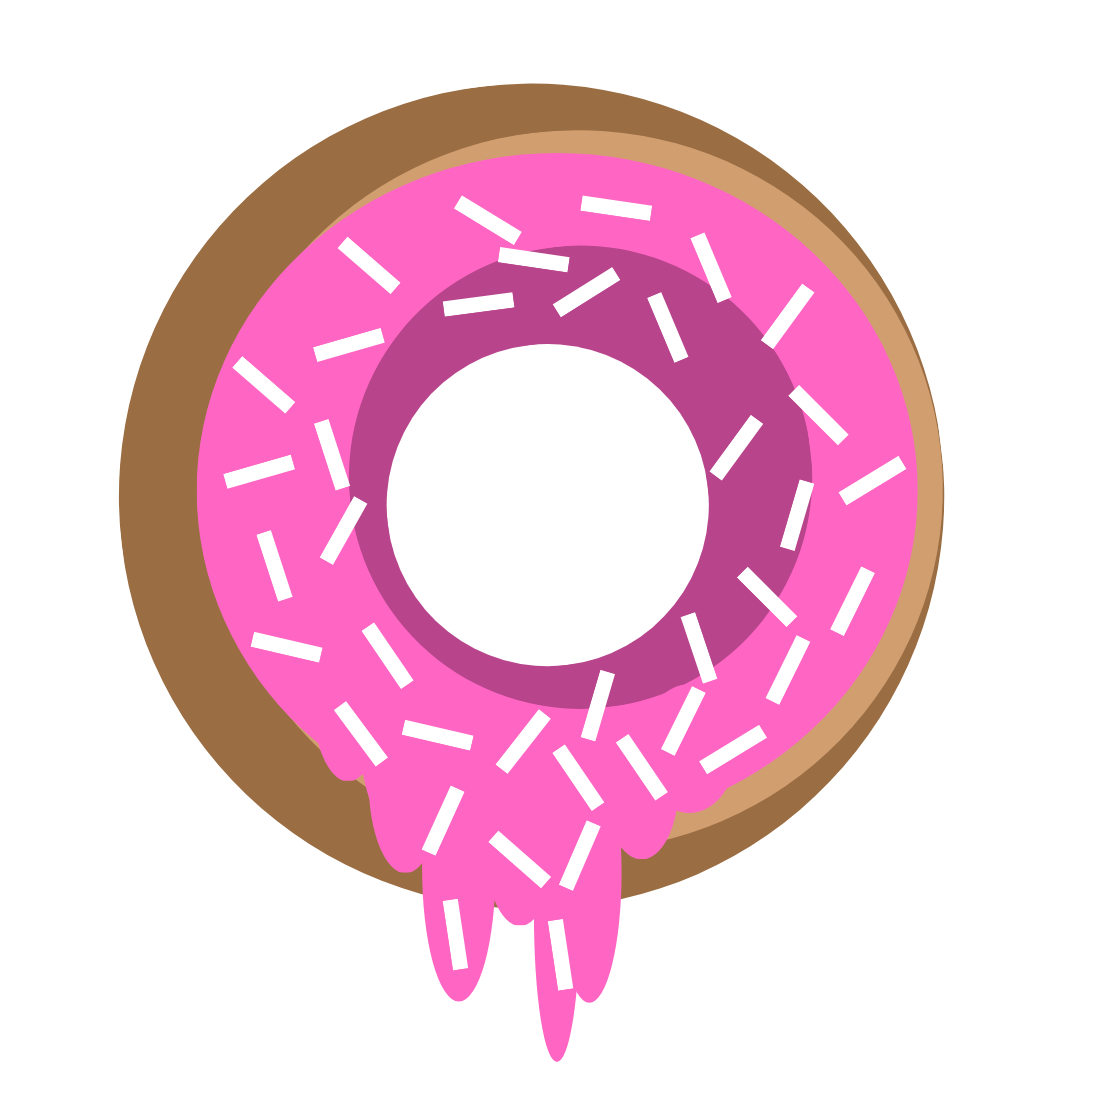 bakery logo preview image.